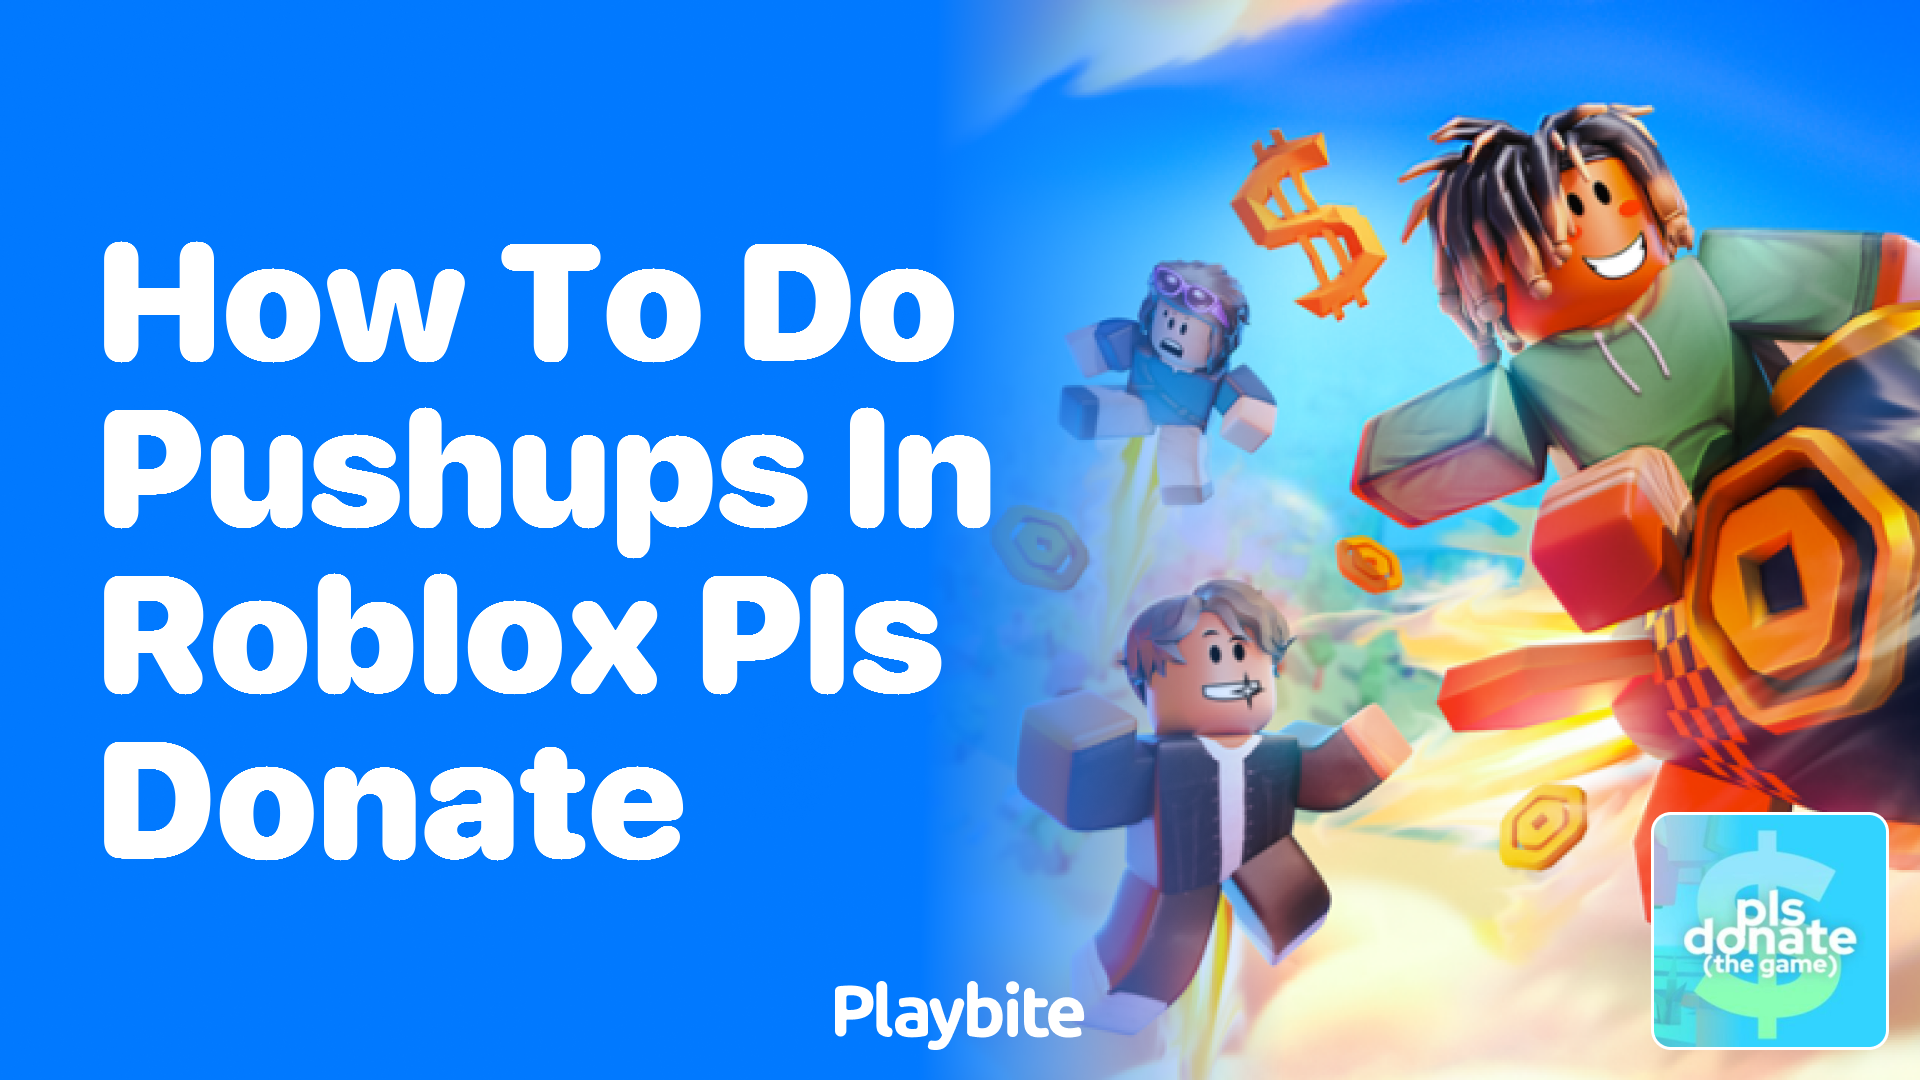 How to do pushups in Roblox PLS Donate